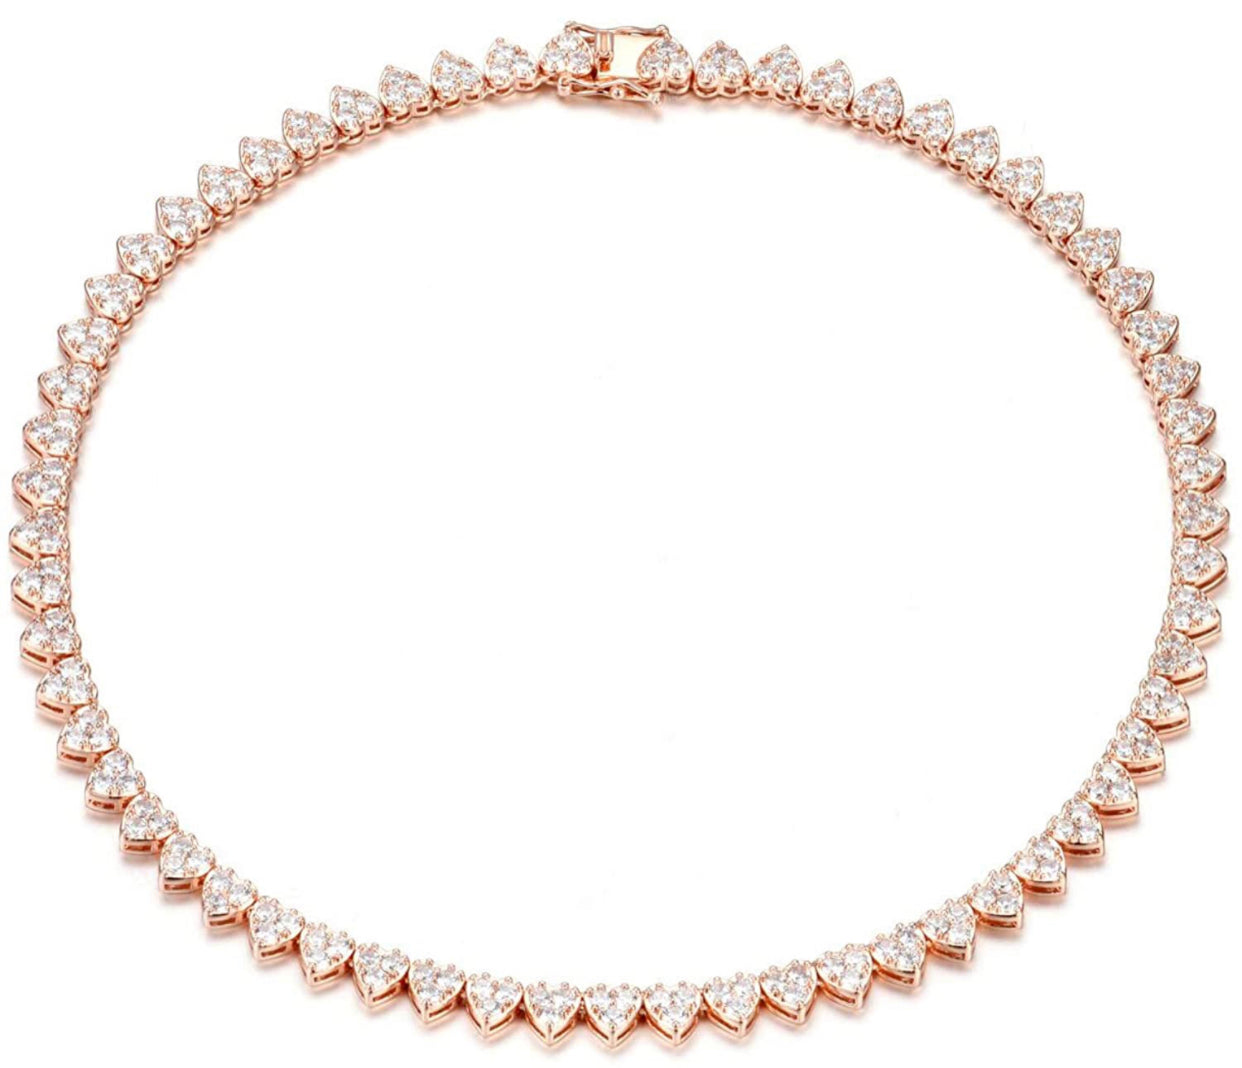 RoseGold Tennis Heart Necklace